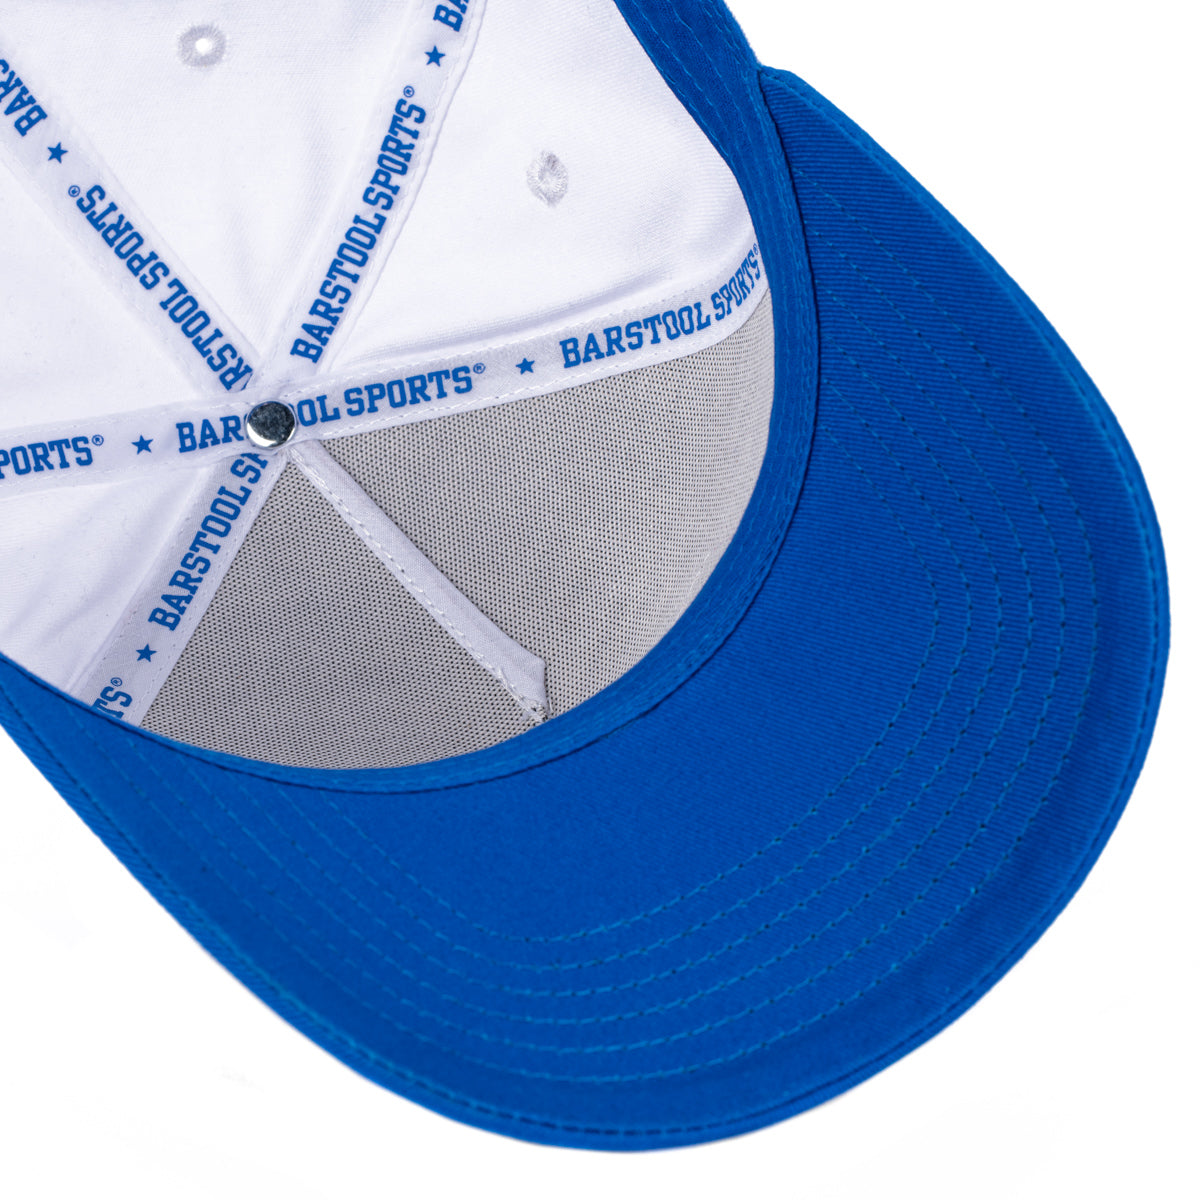 Bussin With The Boys 5-Panel Baseball Hat-Hats-Bussin With The Boys-White-One Size-Barstool Sports